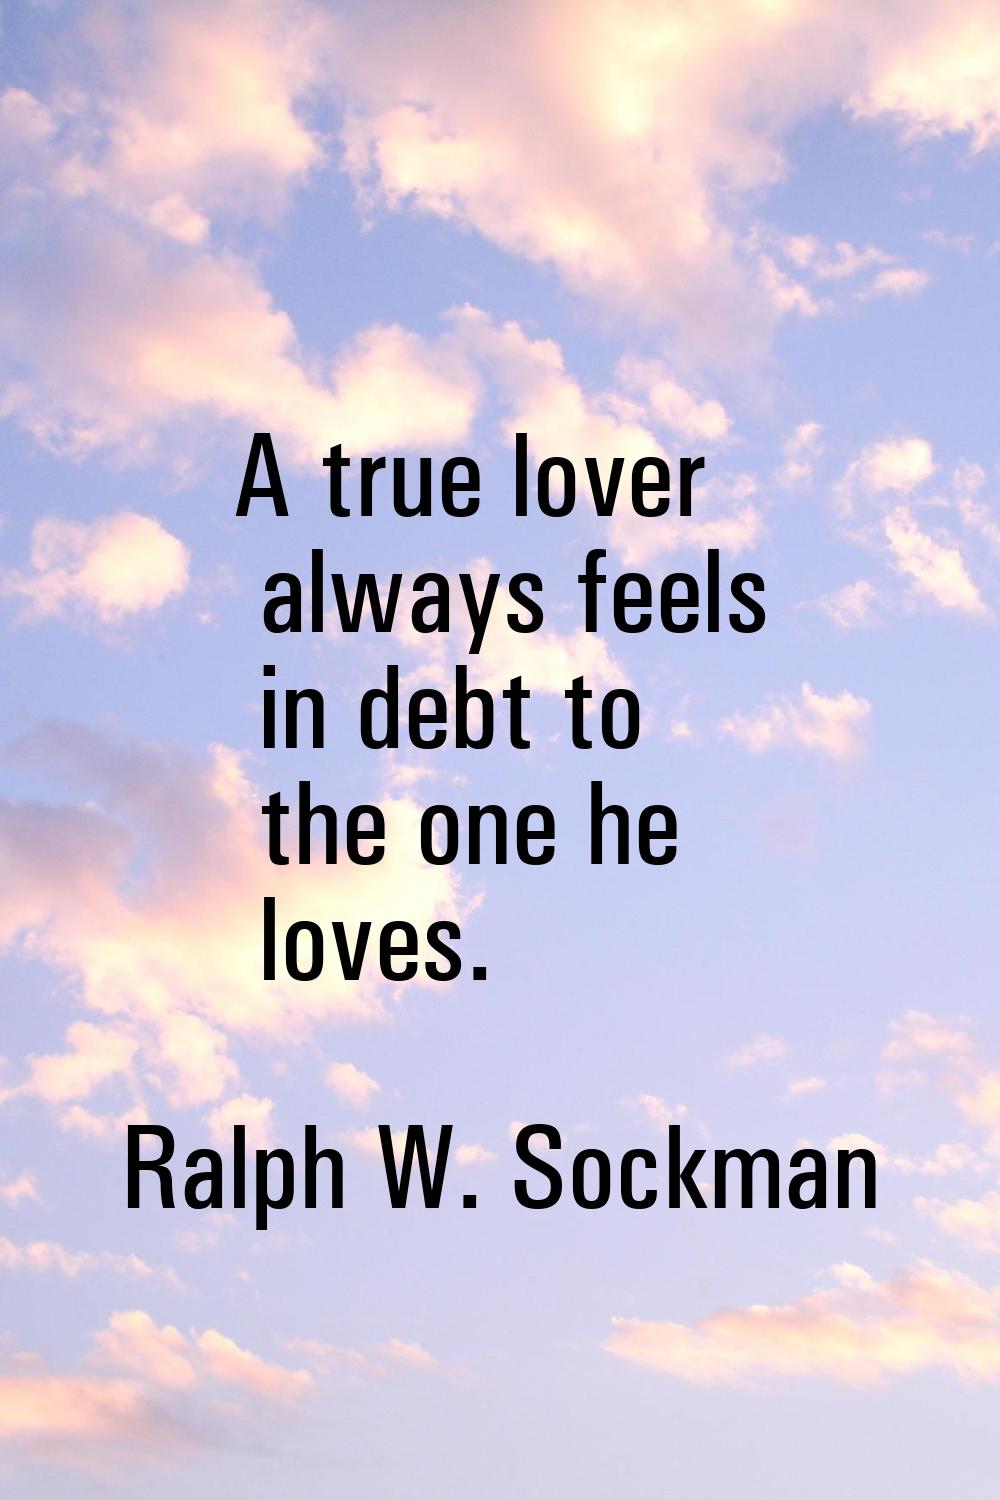 A true lover always feels in debt to the one he loves.